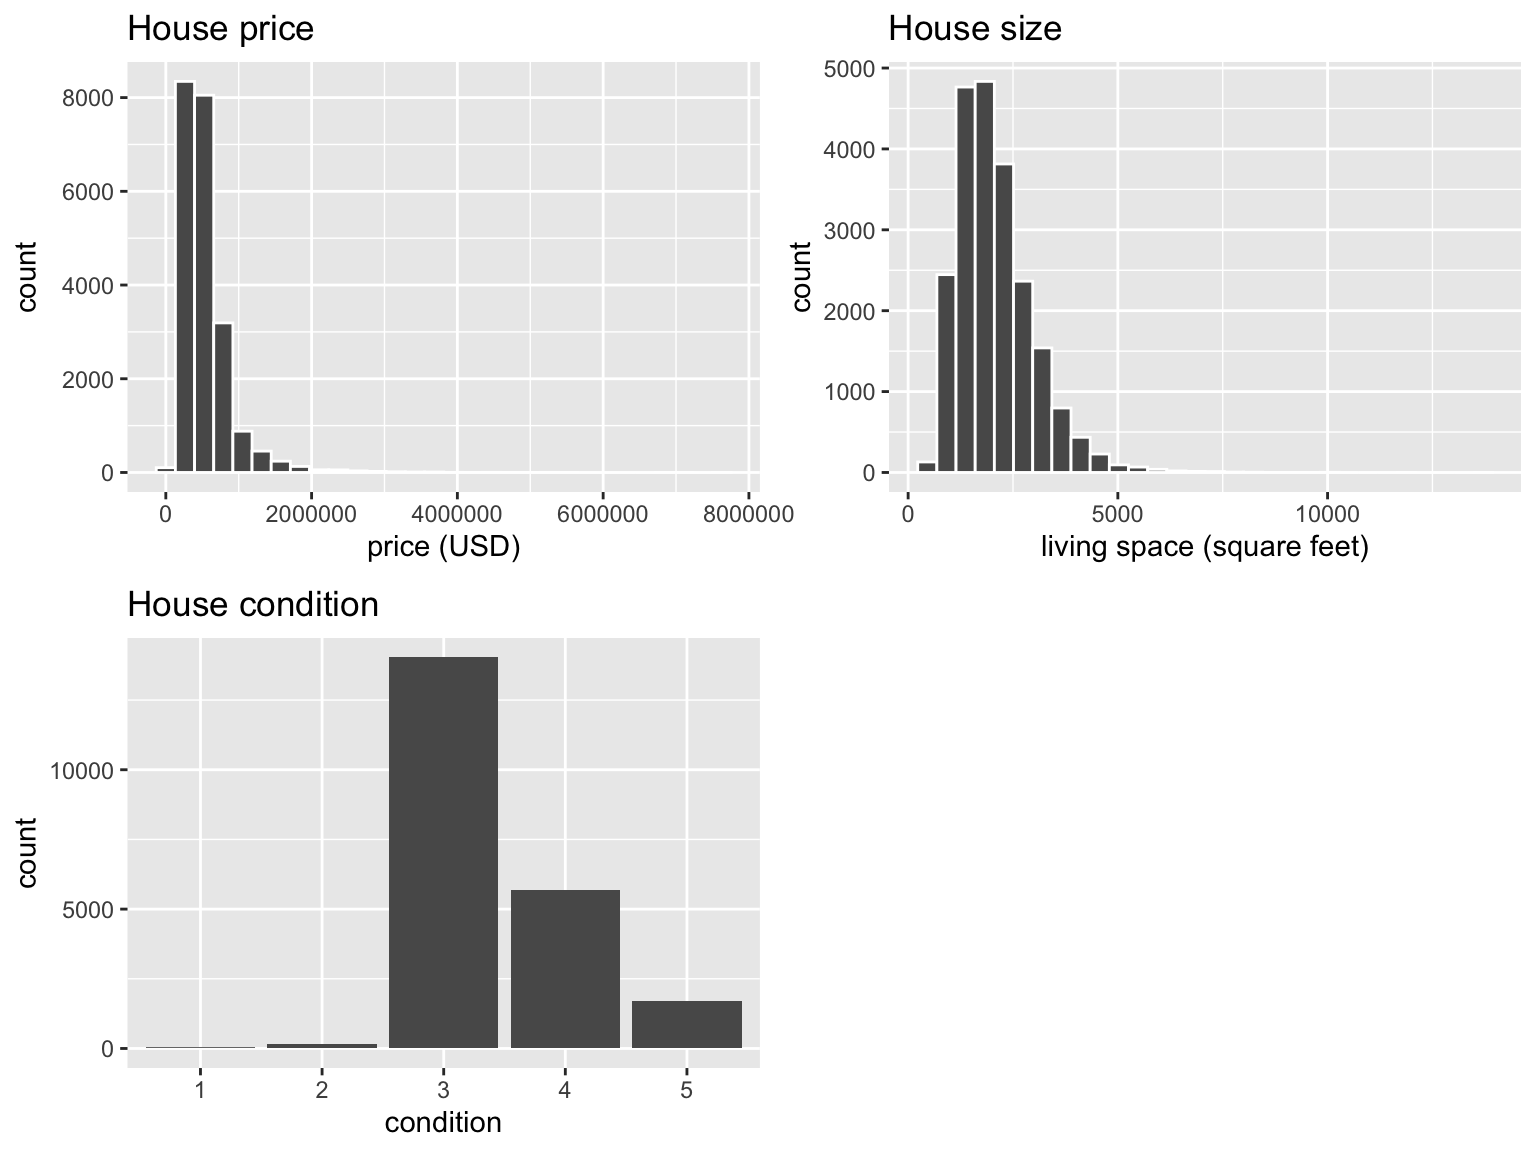 Exploratory visualizations of Seattle house prices data.